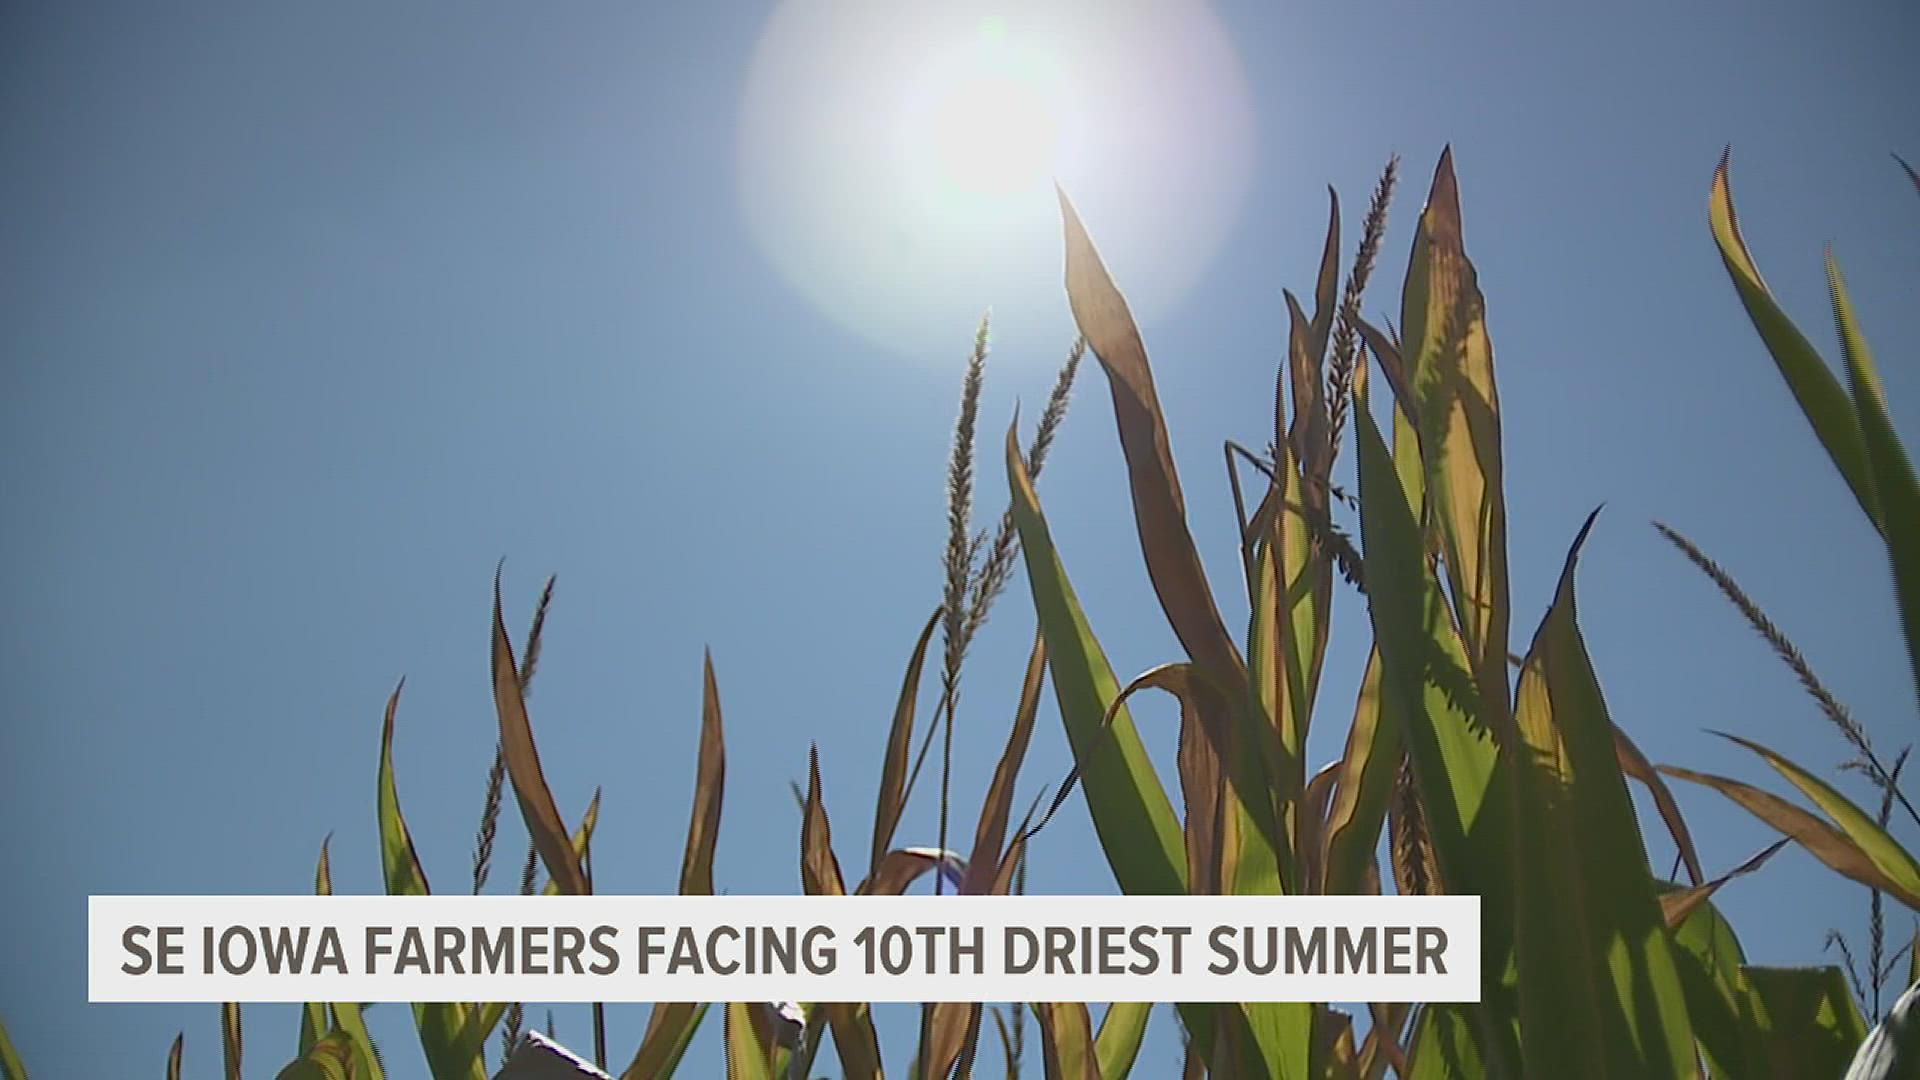 Parts of Southeastern Iowa are experiencing the 10th driest summer on record. But despite the low-moisture, local farmers aren't counting their crops out just yet.